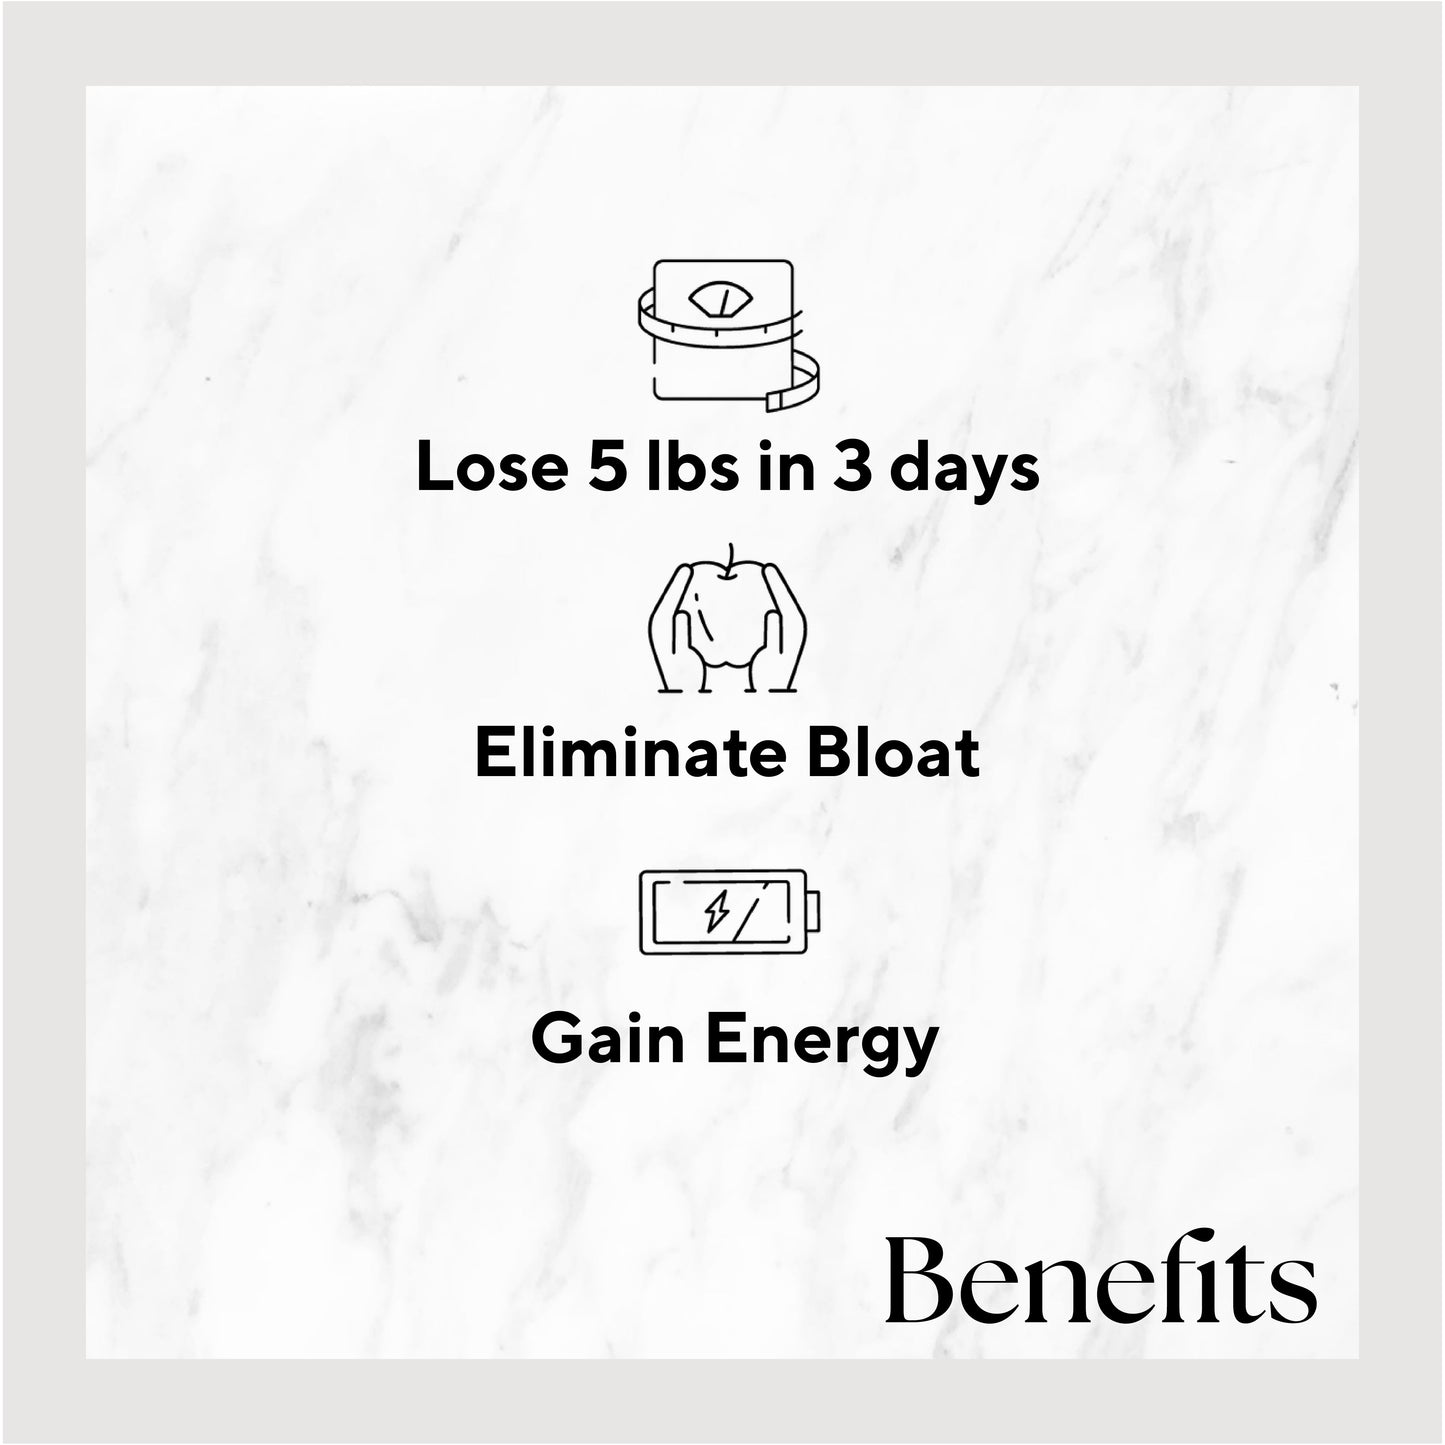 Infographic listing benefits of the product. Benefits include: Lose 5 lbs in 3 days, Eliminate Bloat, and Gain Energy.